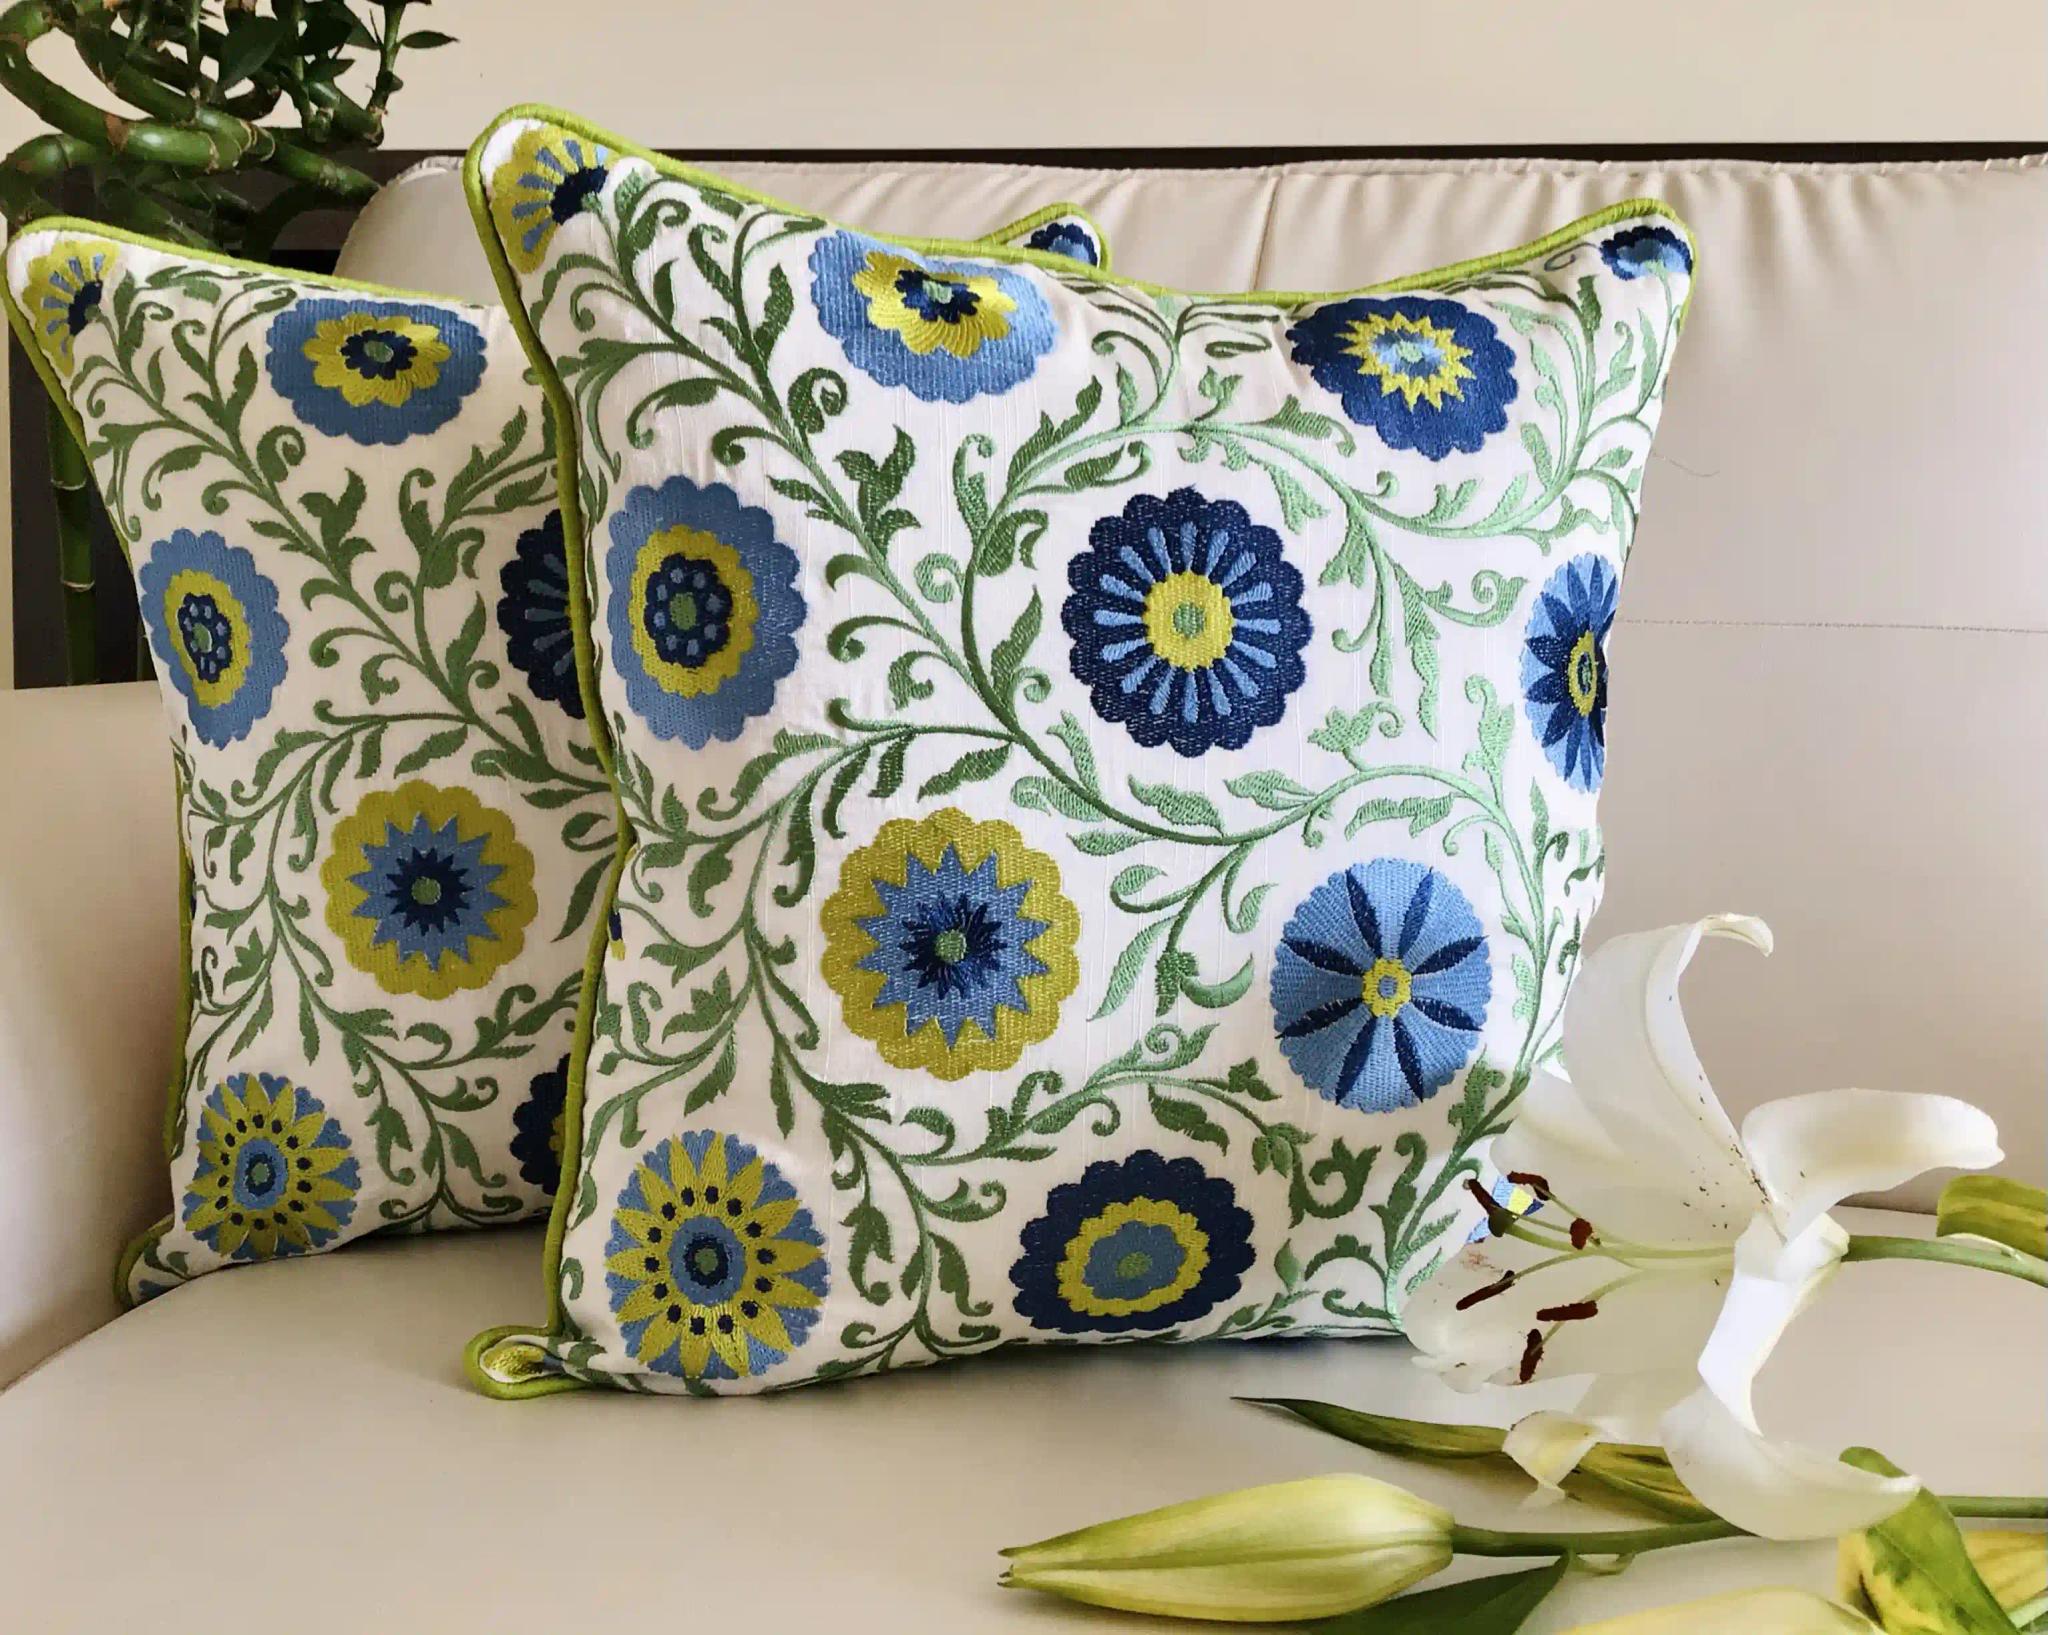 Shaan-e-Gulmarg-  Embroidered Cotton Silk Cushion Cover- Blue & Green- Set of 2